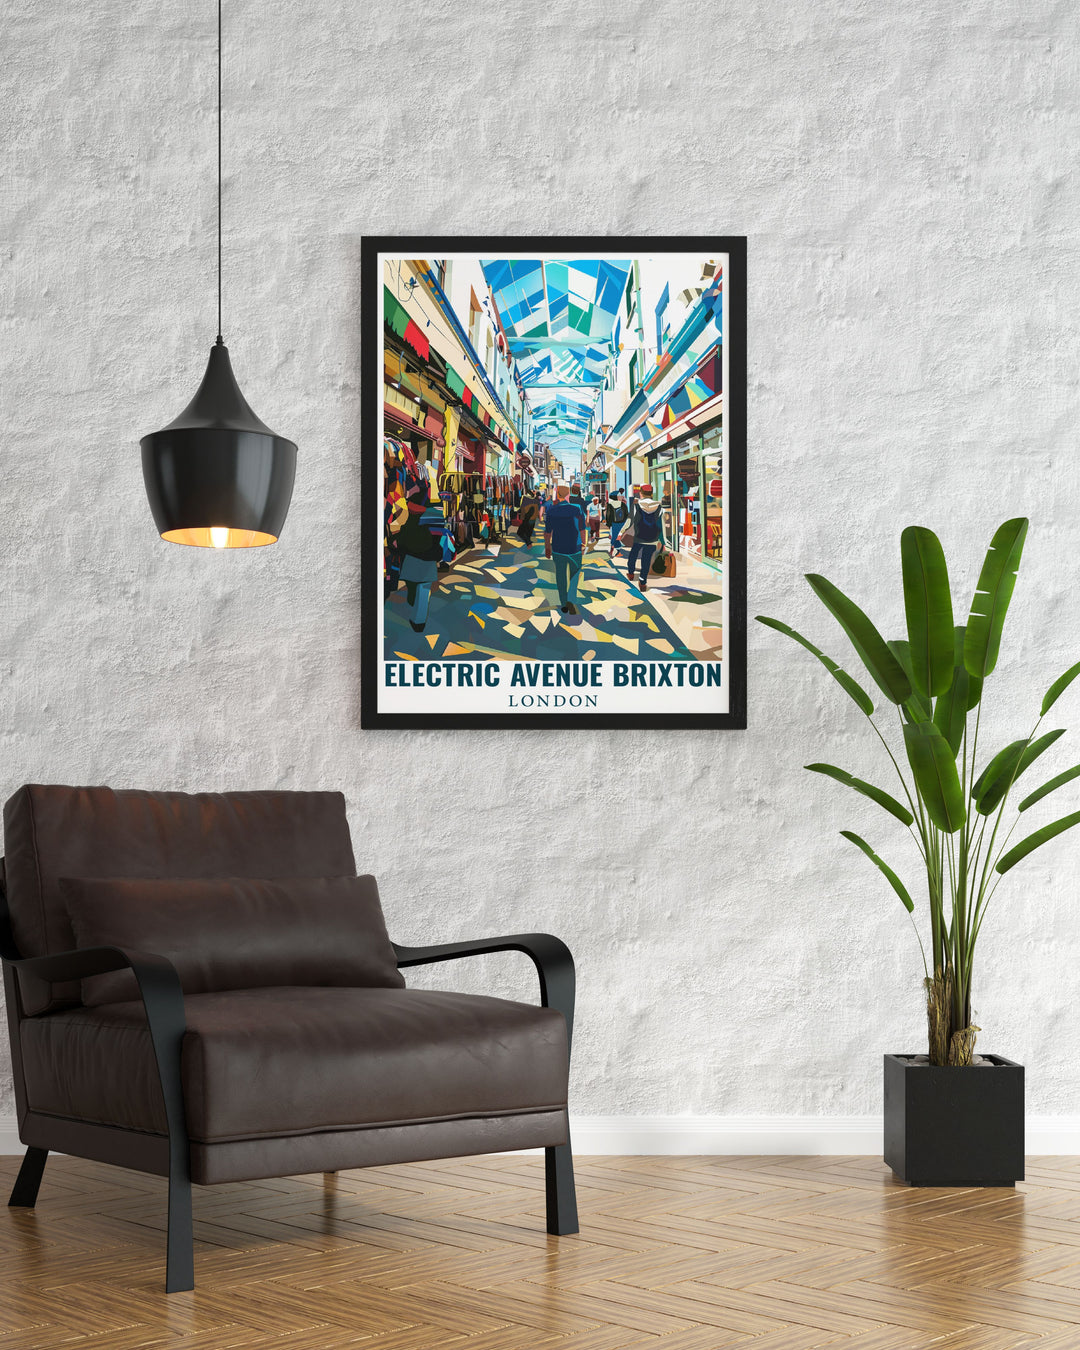 This art print of Electric Avenue and Brixton Market showcases the eclectic mix of market stalls, shops, and cultural landmarks, making it a standout piece for any decor.